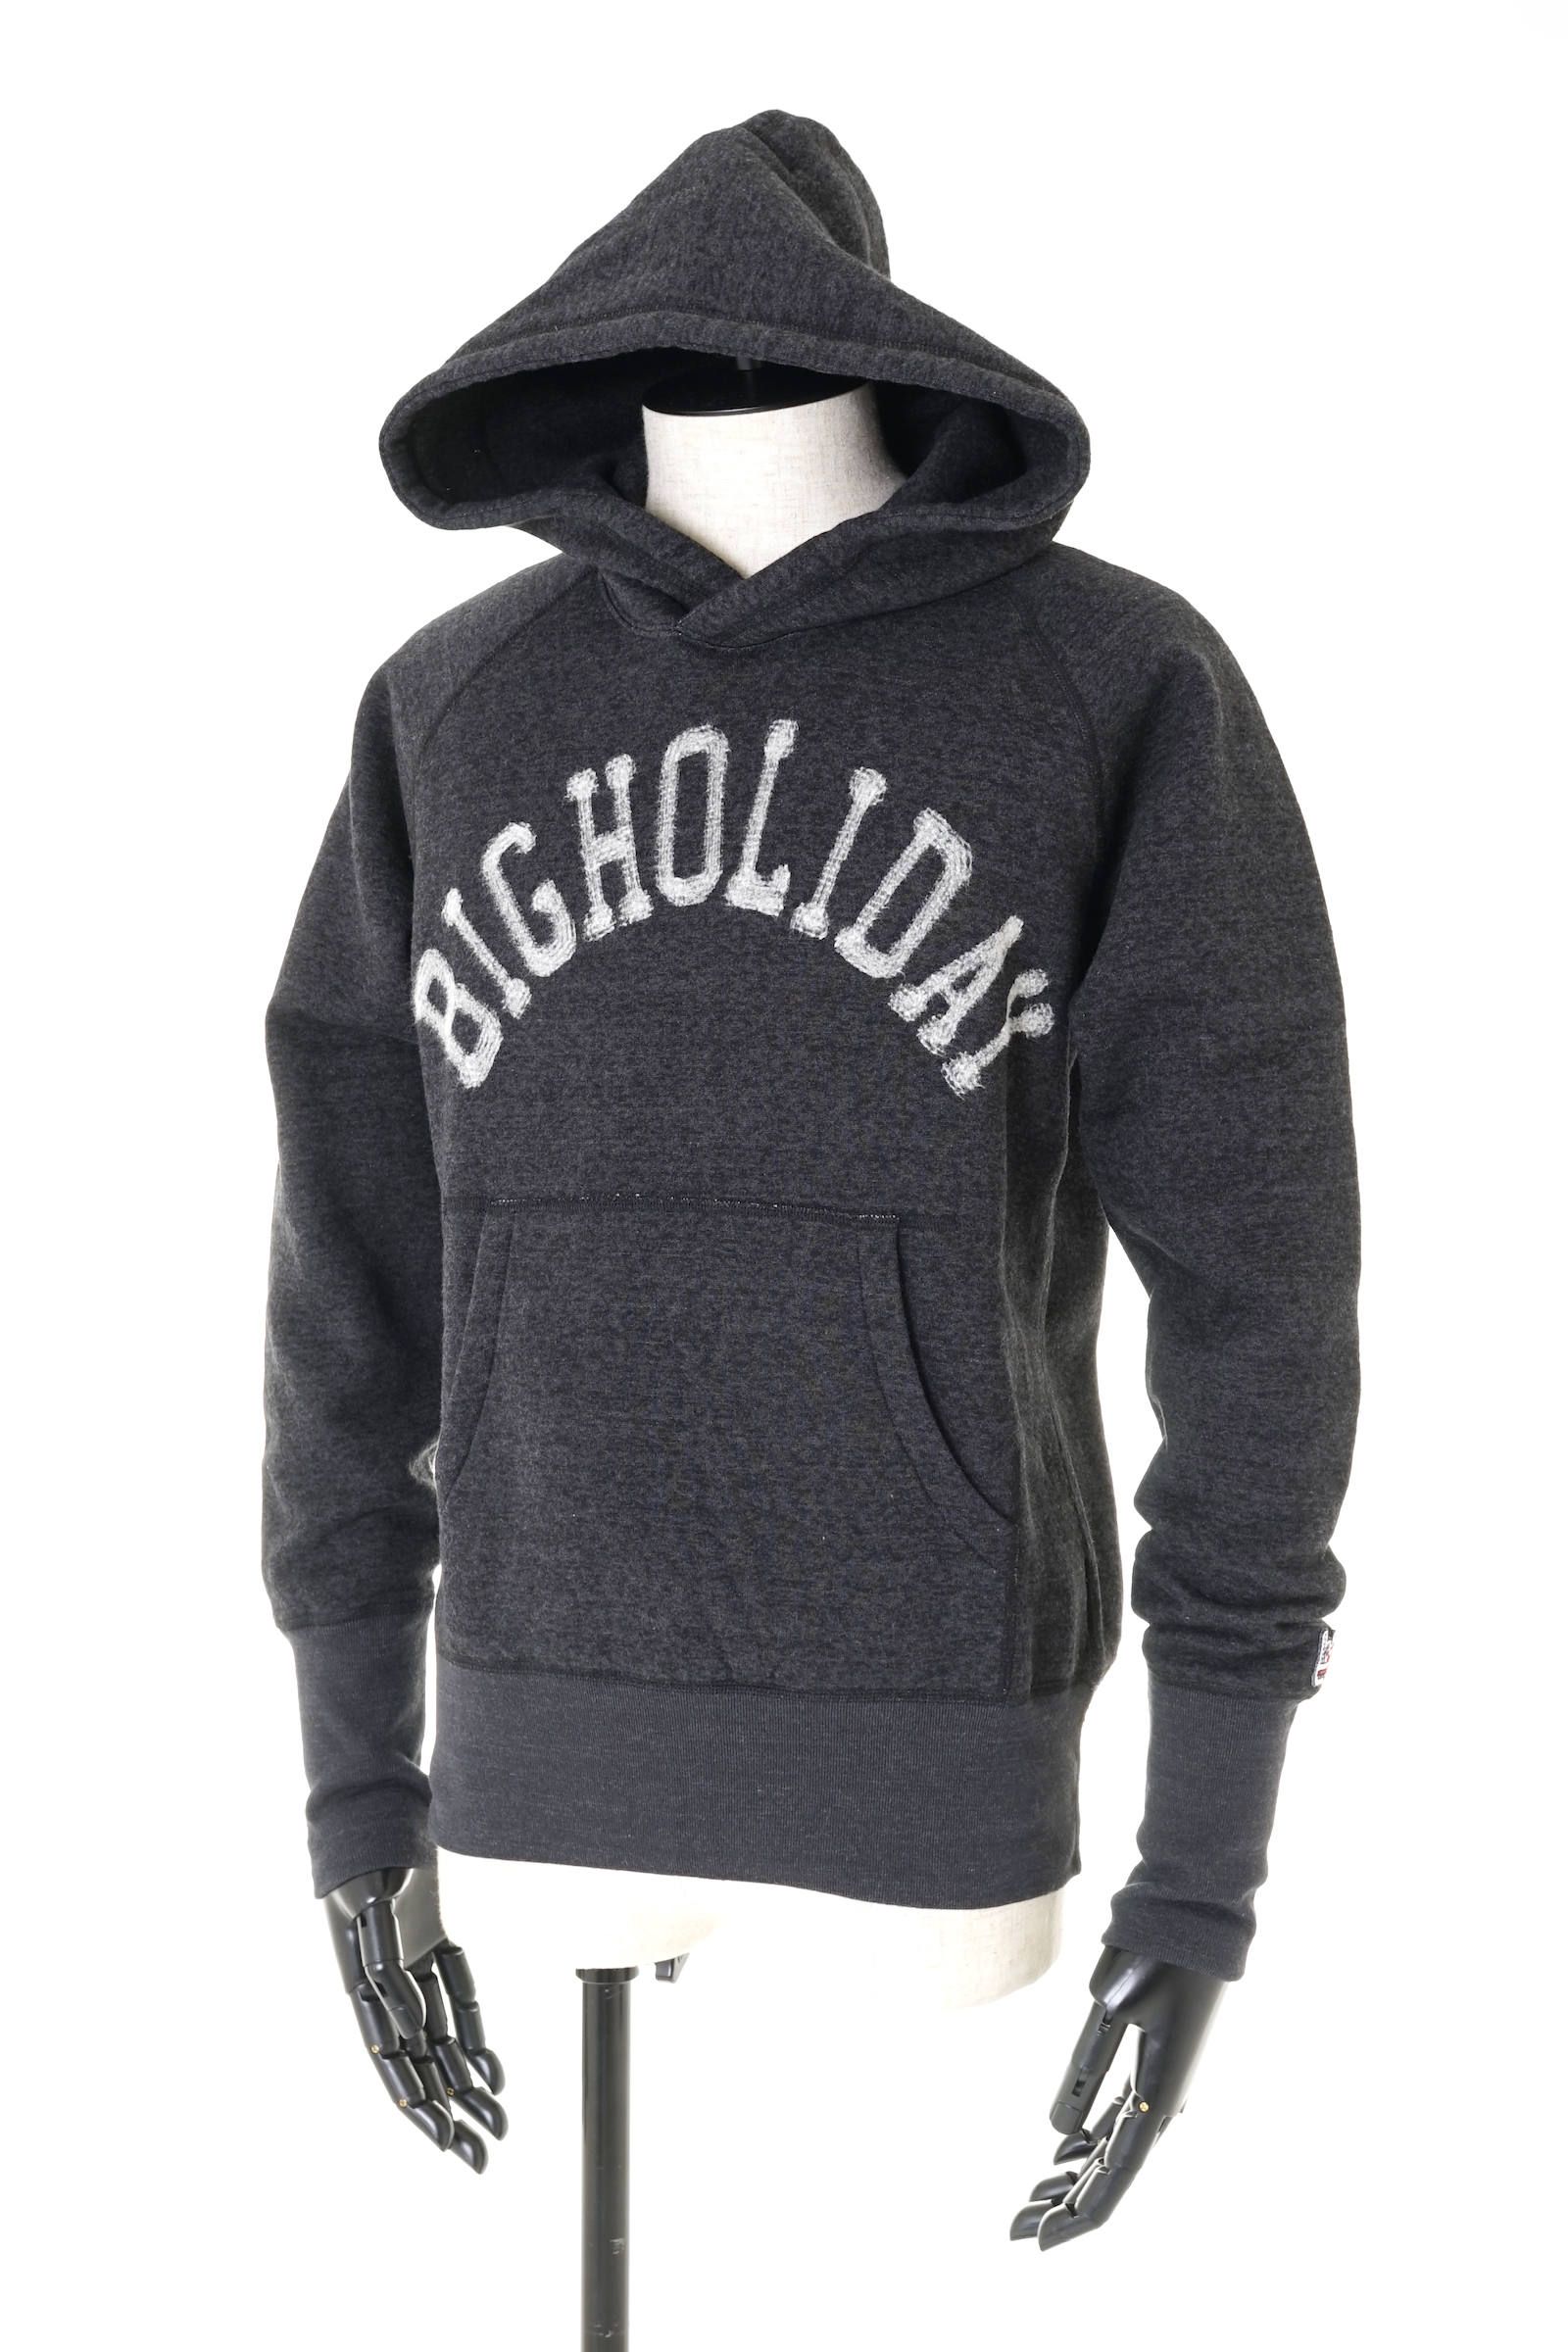 BACK-FREEZE NEEDLE PUNCH HOODIE(BIGHOLIDAY)TSWF1803 【即日発送可能!】 - S